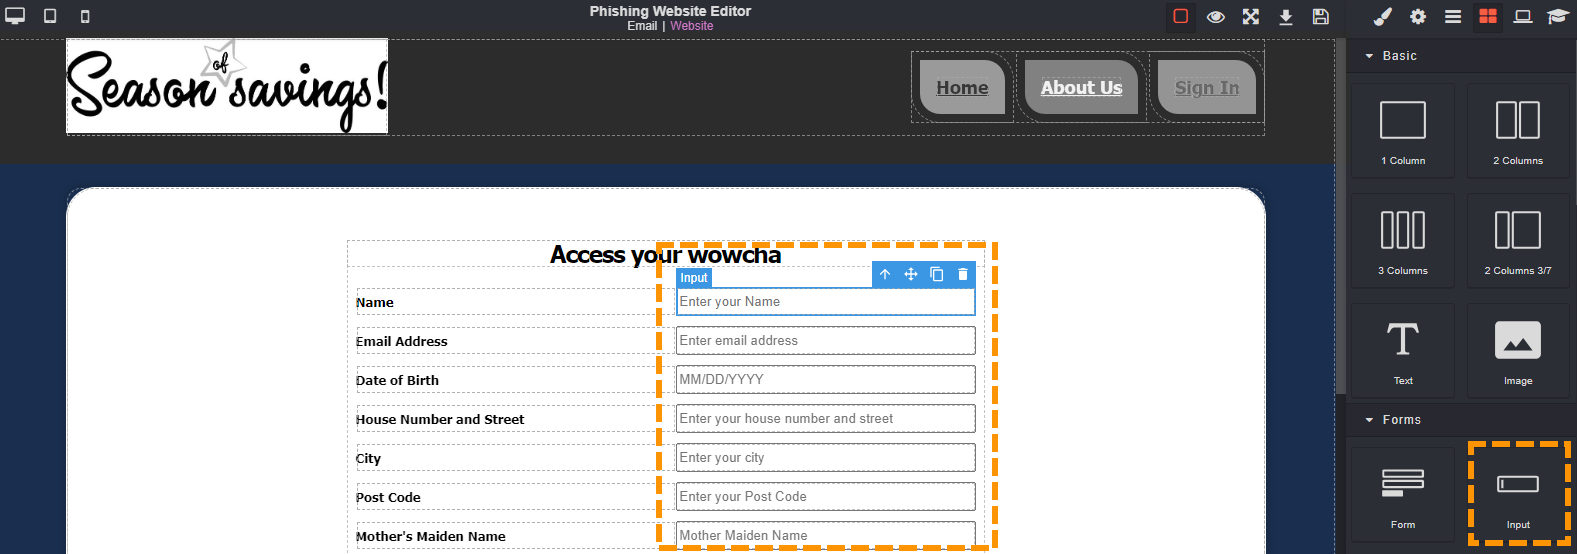 Screenshot to show the input button and where it can be used in a website